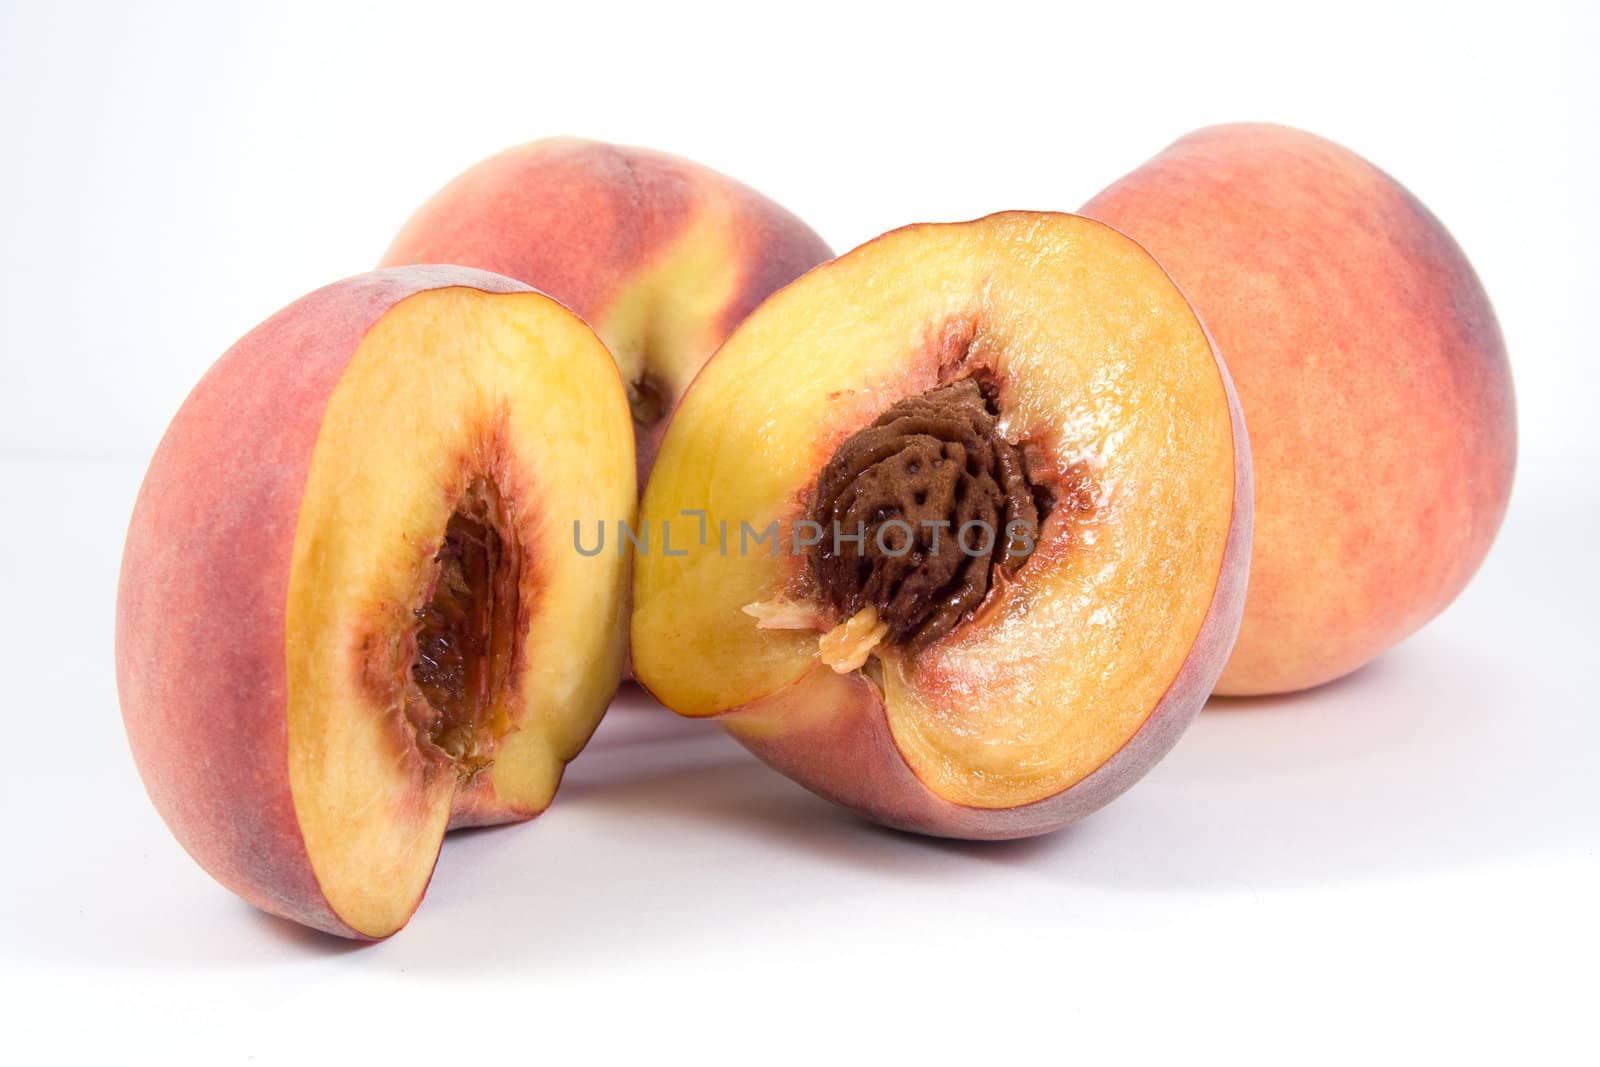 Three juicy peaches. Foreground one is divided in half by serpl